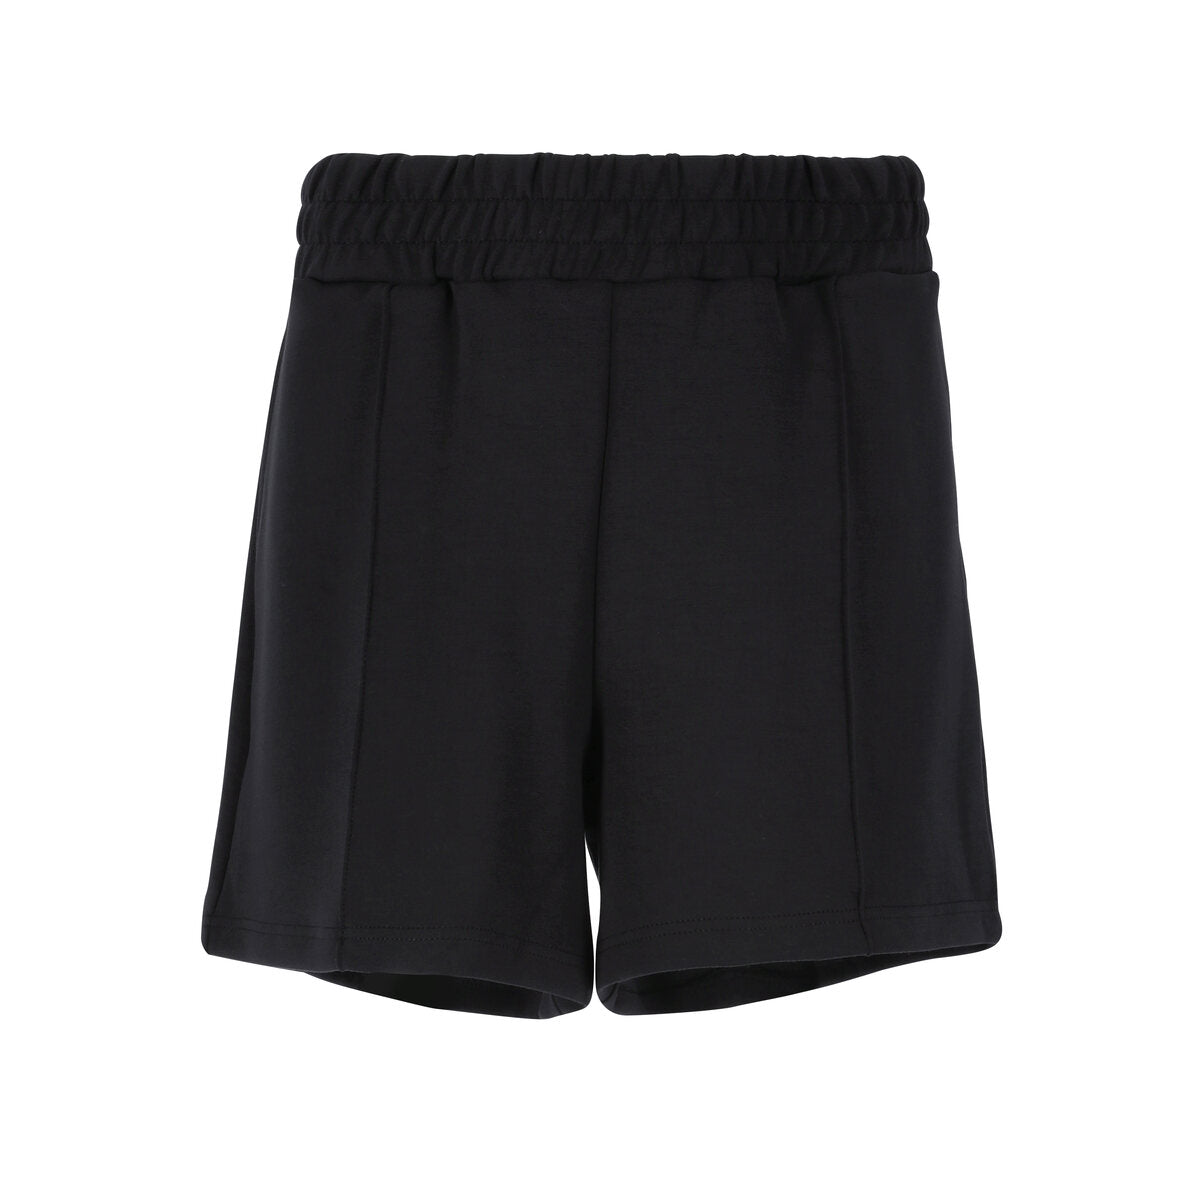 Athlecia Jacey Womenswear High Waisted Lounge Shorts - Black 7 Shaws Department Stores